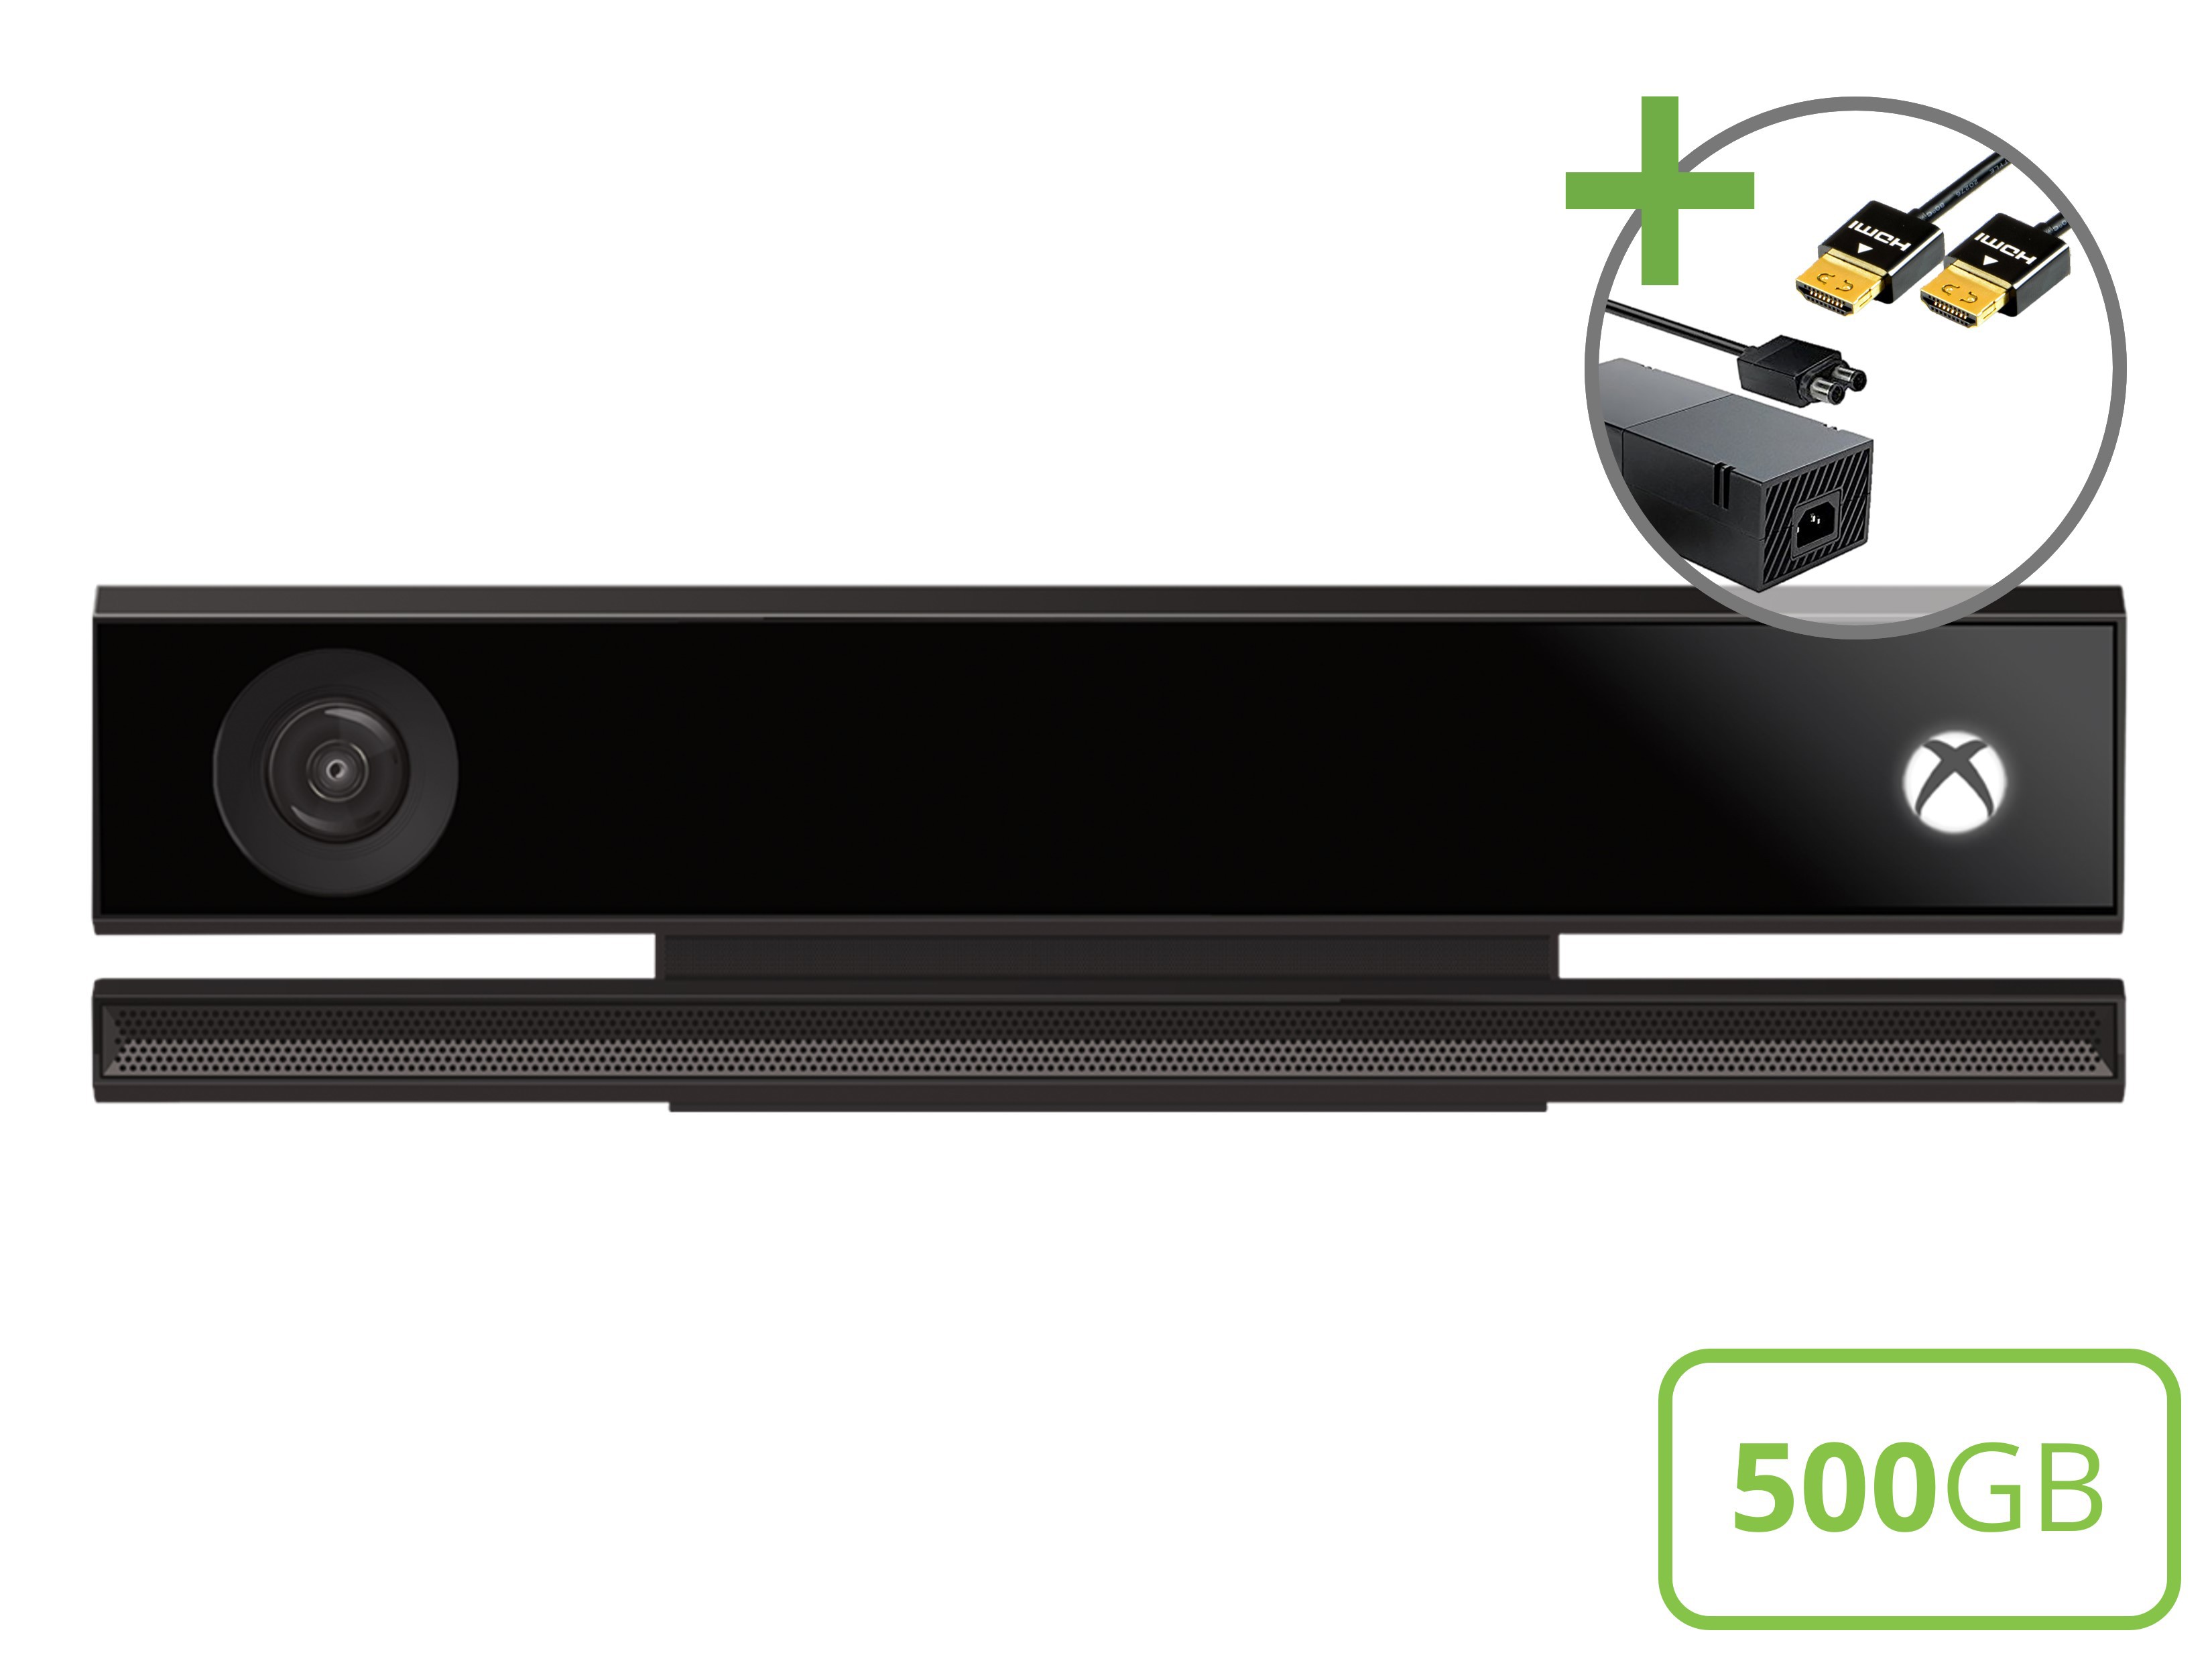 Microsoft Xbox One Starter Pack - 500GB Kinect Edition - Xbox One Hardware - 4